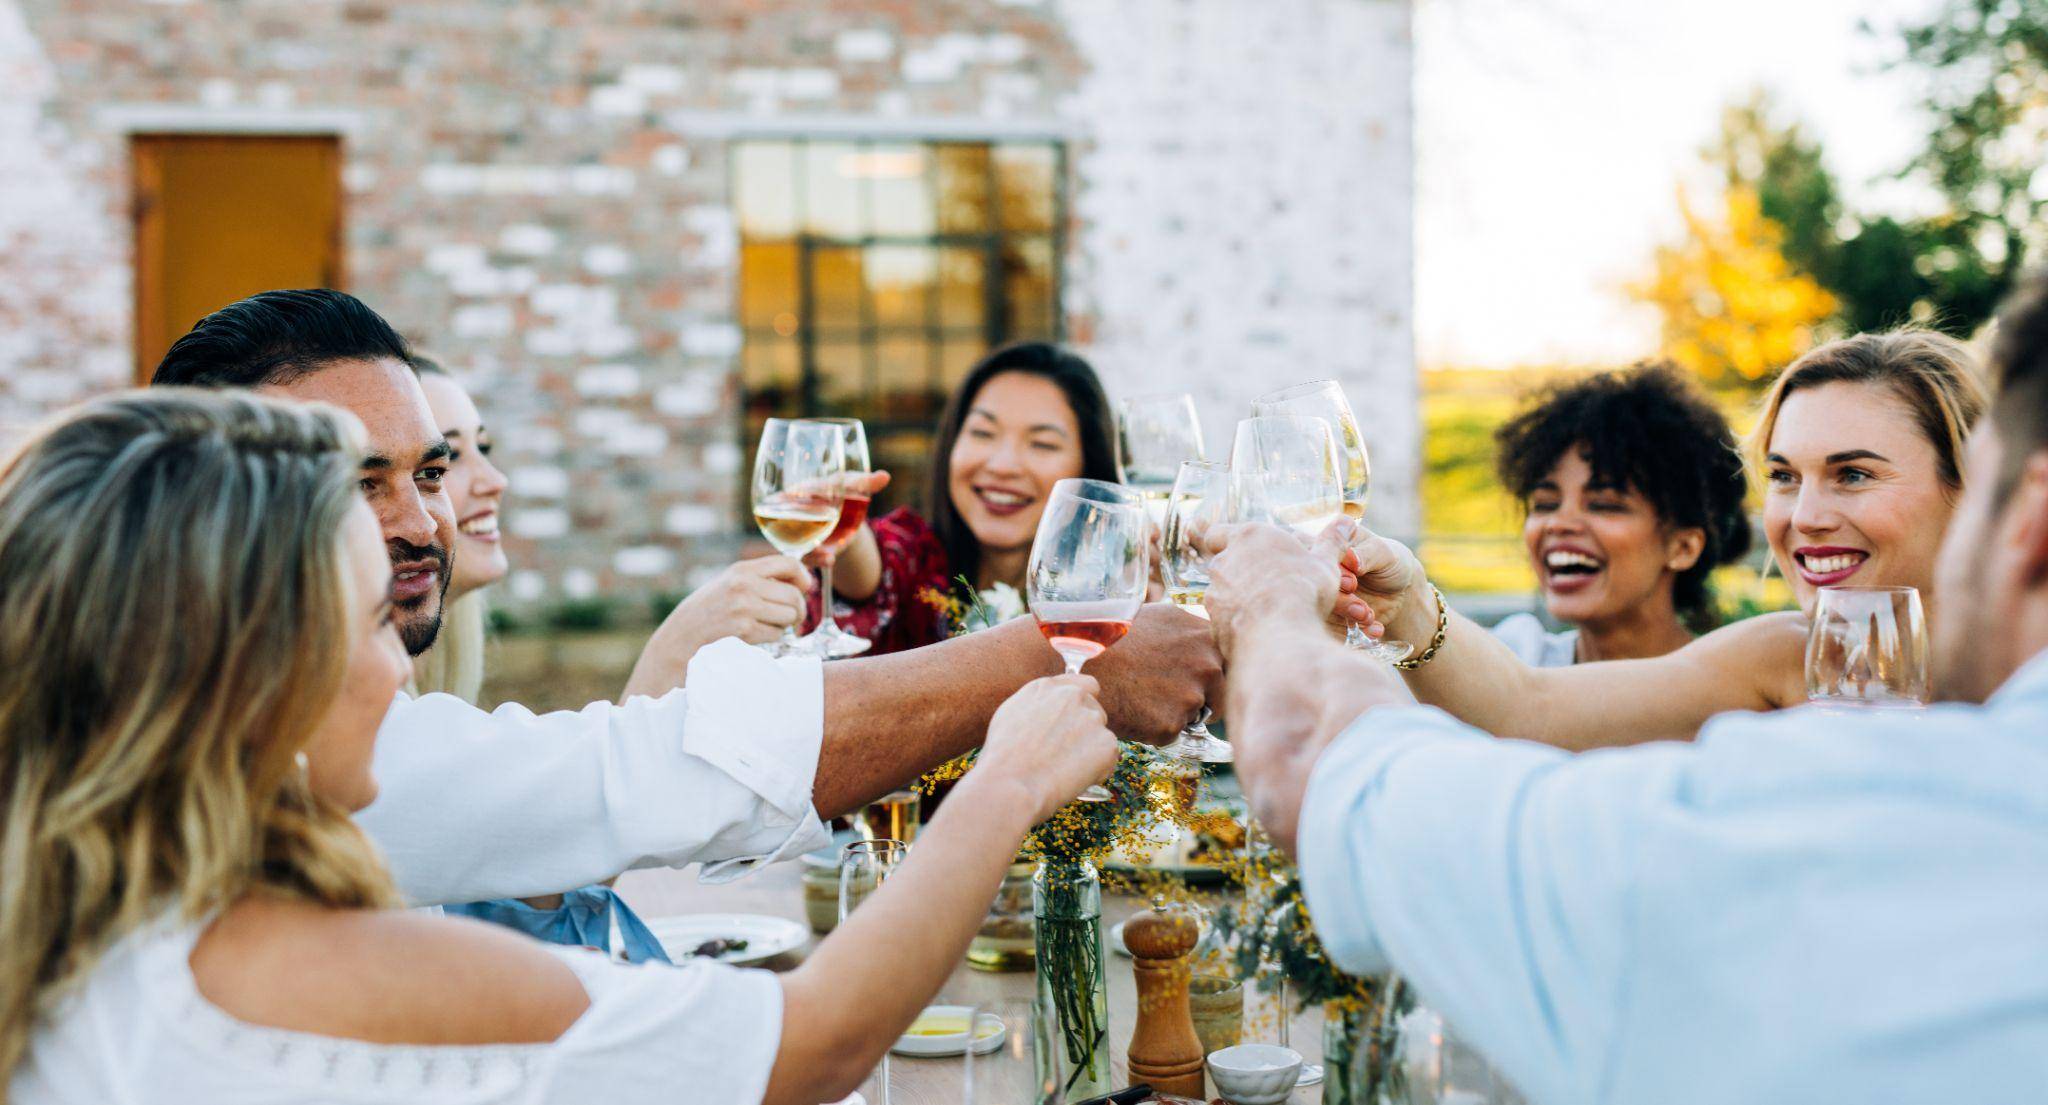 Bring the Party to Your House: Outdoor Entertaining Tips